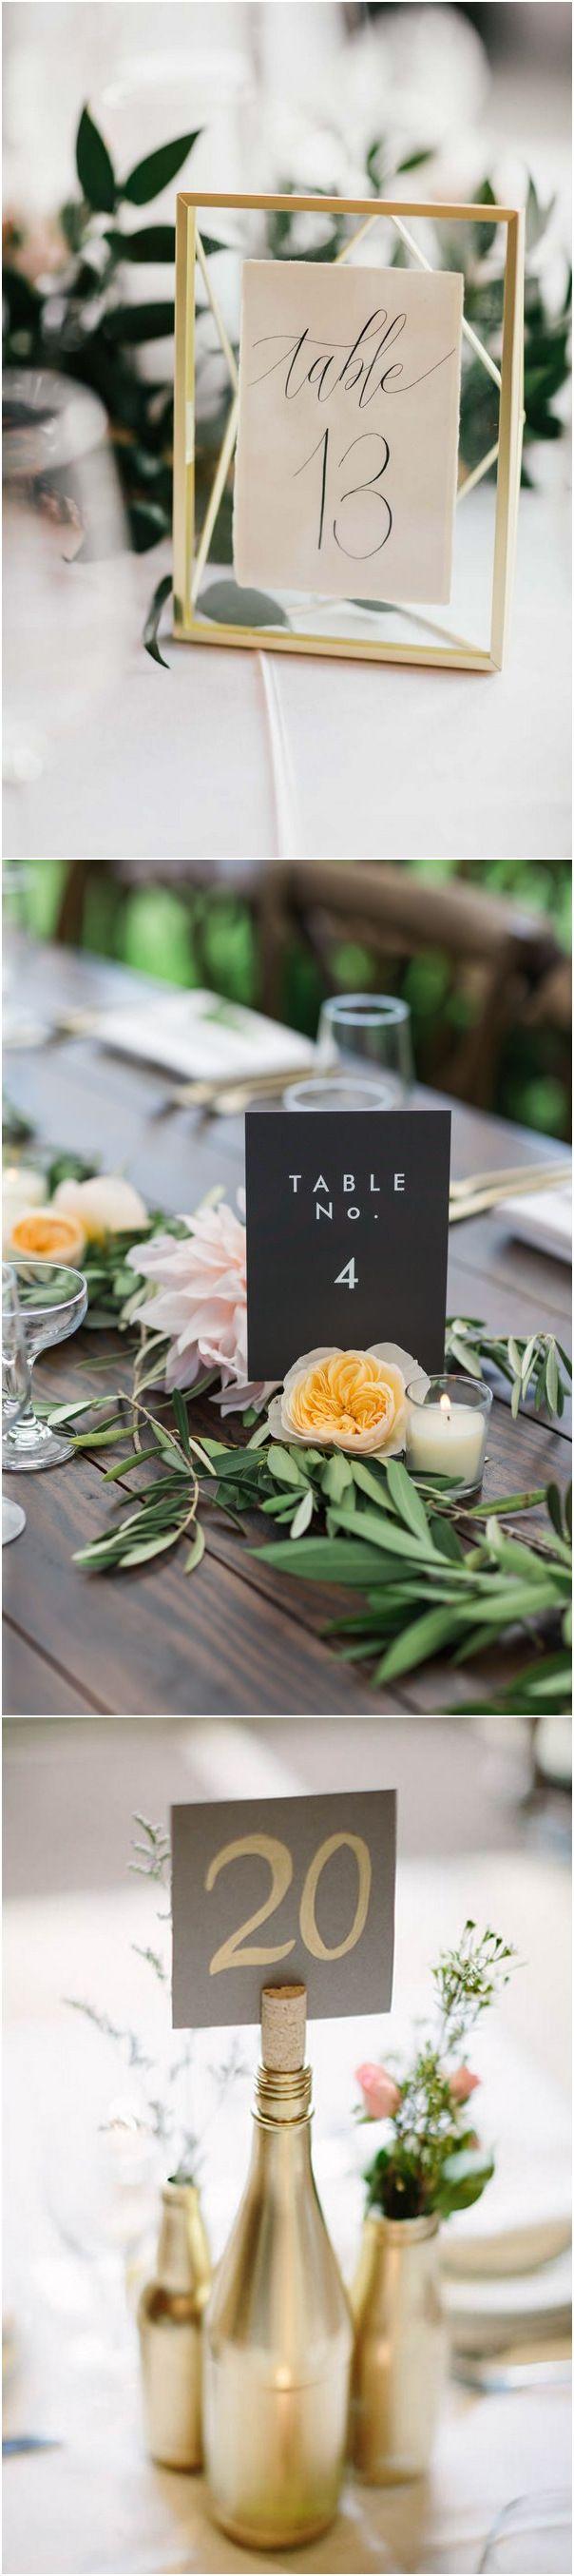 Hochzeit - 18 Inspiring Wedding Table Number Ideas To Love - Page 3 Of 3